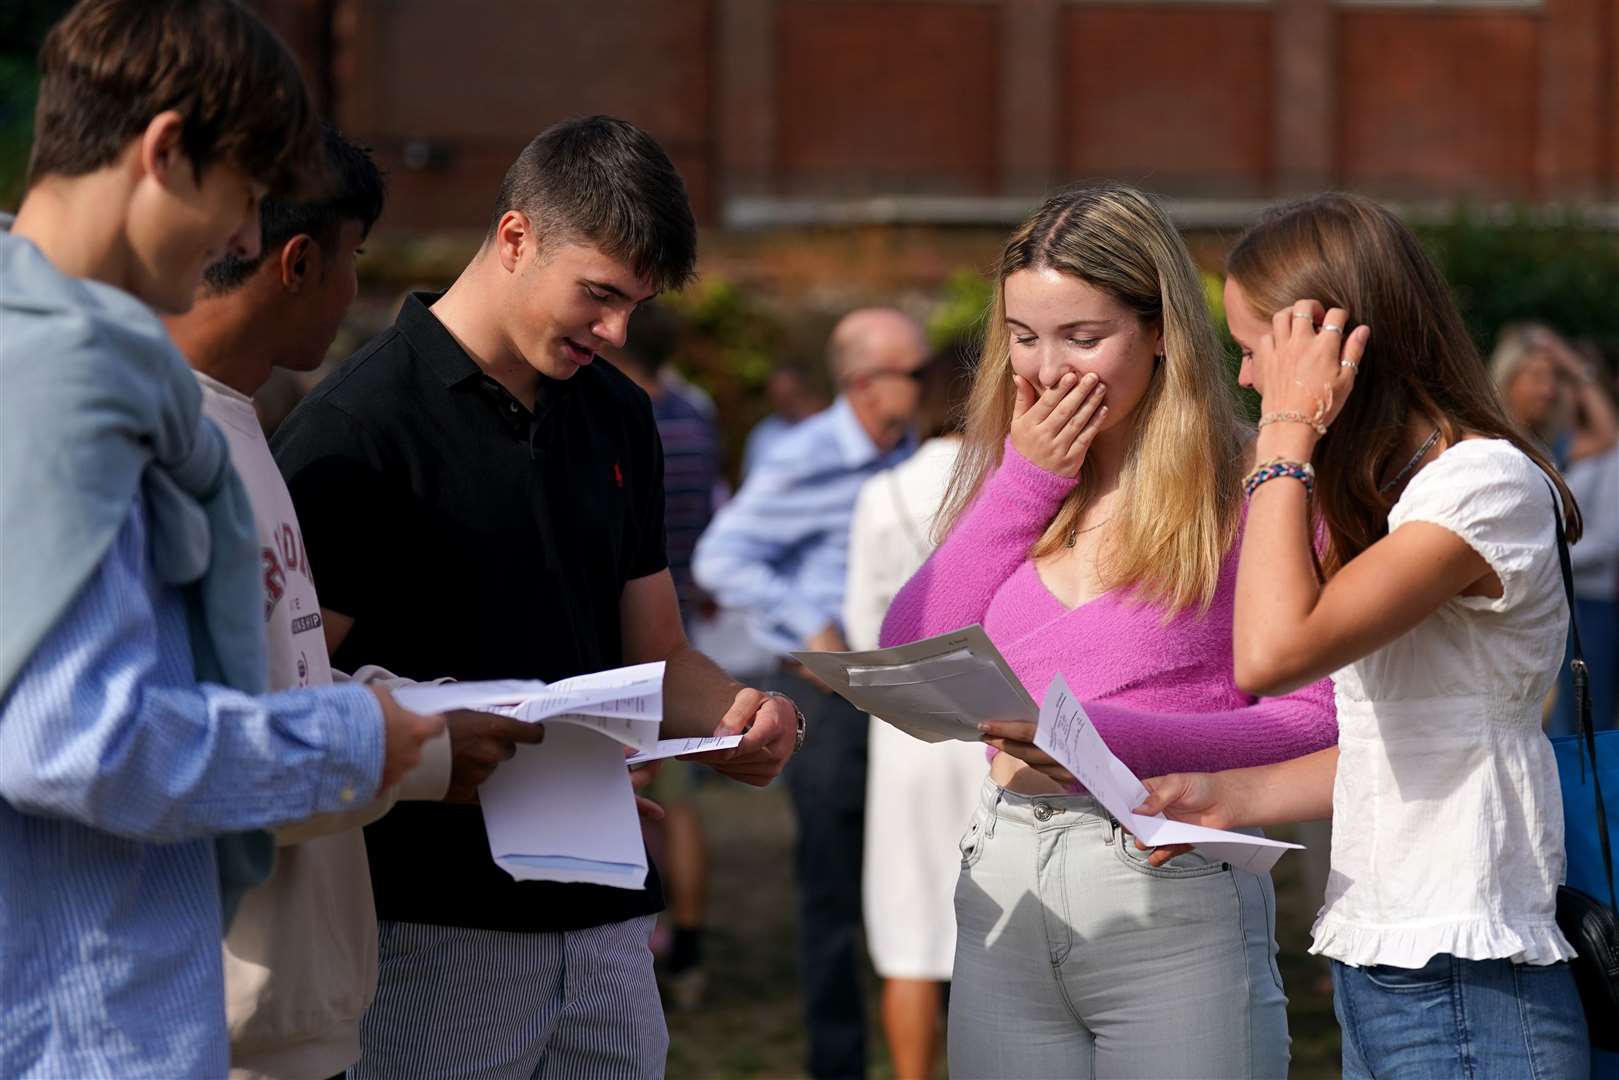 Anna Austin, centre right, reacts when reading her A-level results at Norwich School (Joe Giddens/PA)